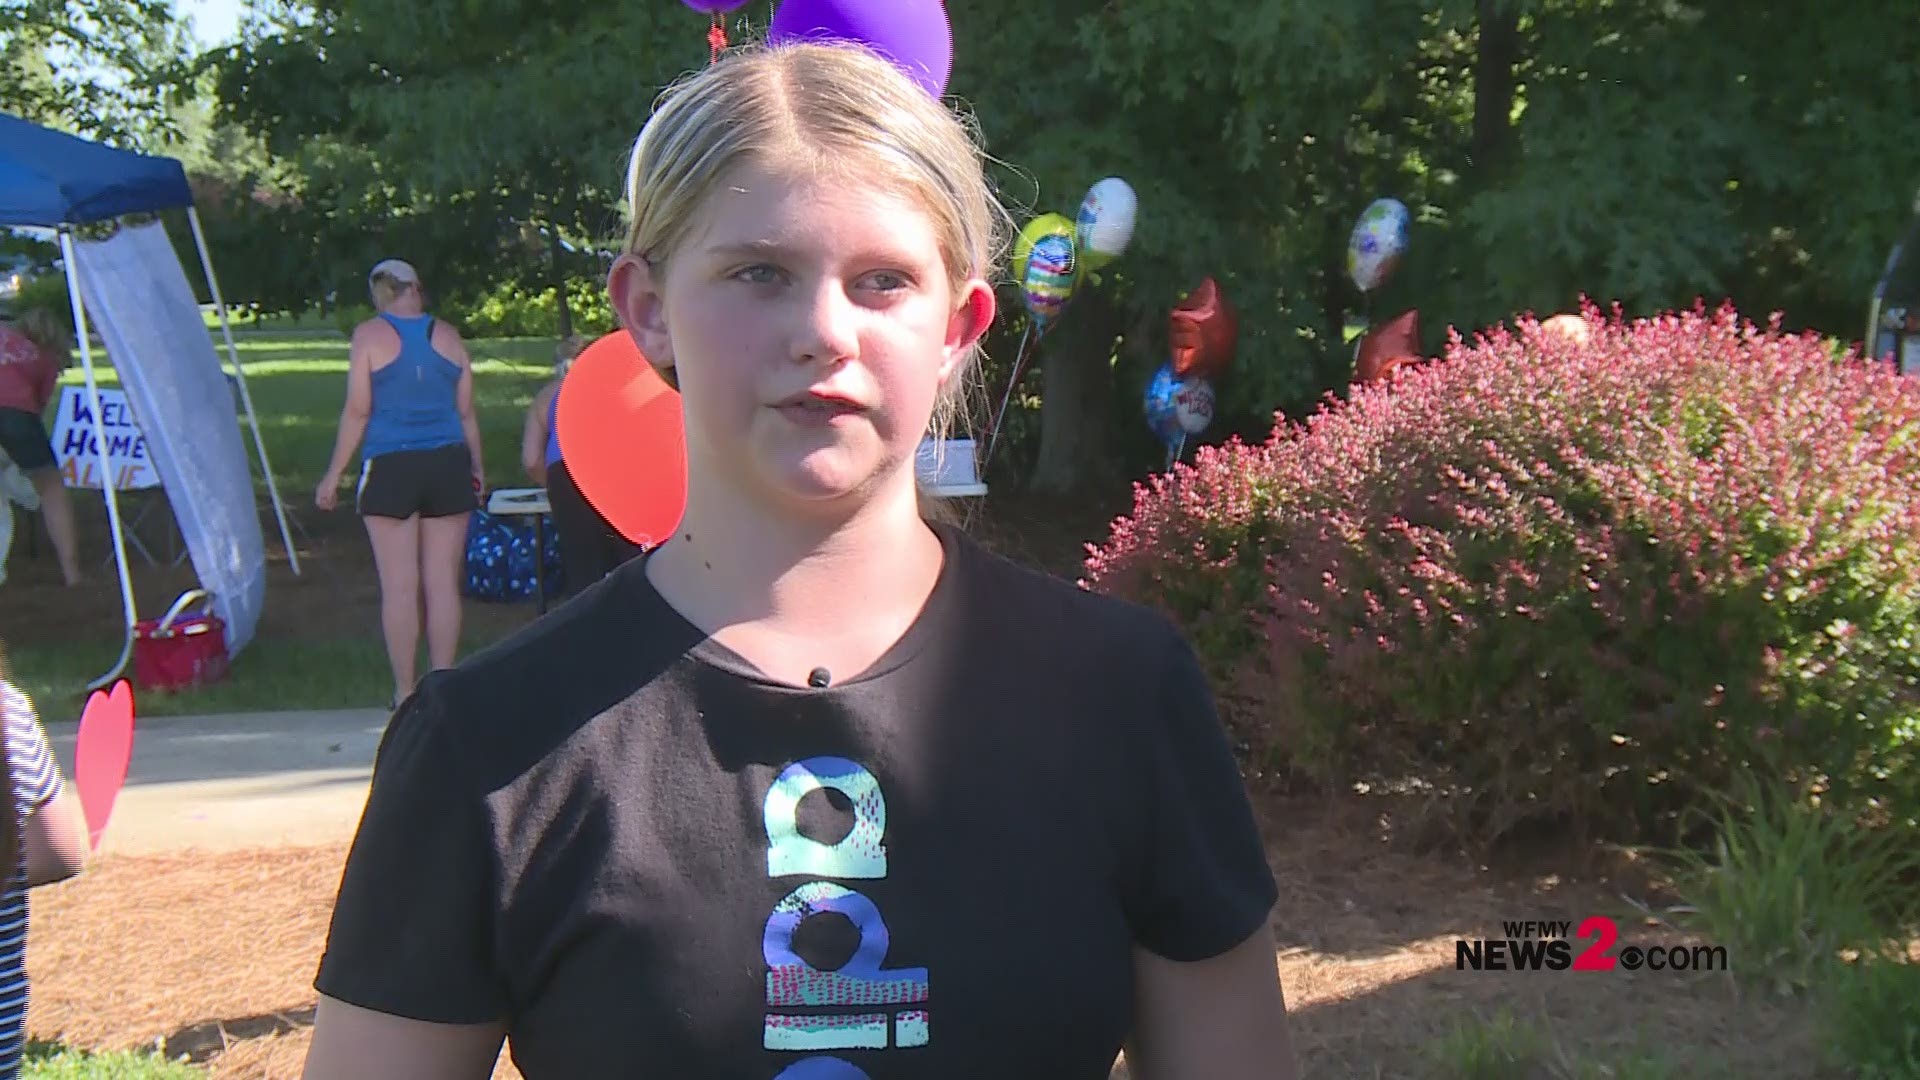 It was a spectacular homecoming for a Triad fifth grader who's been through a lot. Allie Zuppo was diagnosed with leukemia last summer. She had a special celebration as family and friends gathered to surprise her.